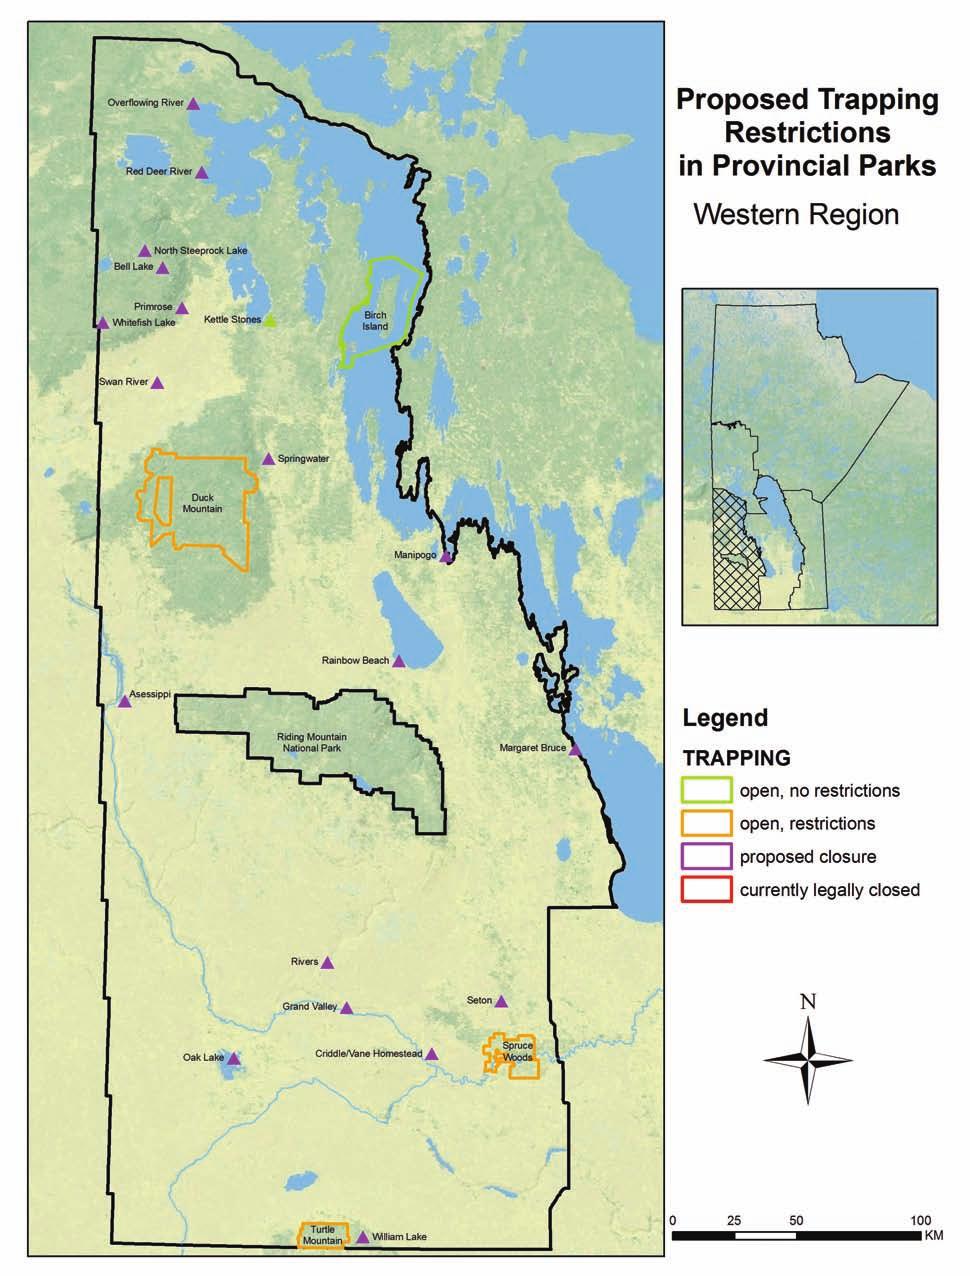 Proposed Trapping Restrictions in Provincial Parks WESTERN